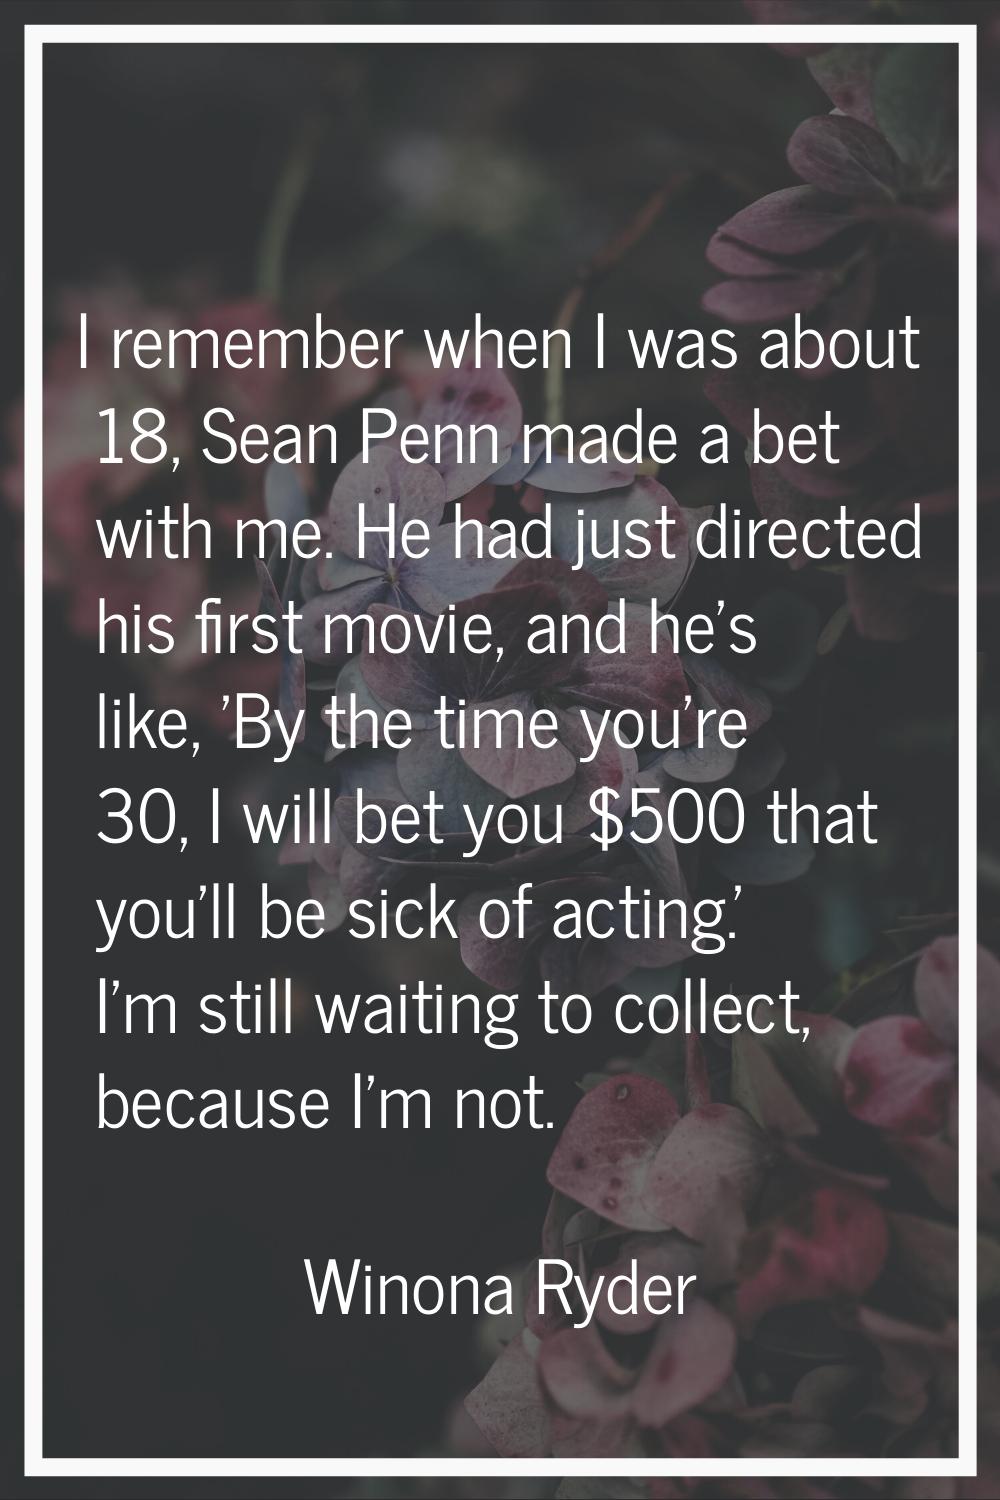 I remember when I was about 18, Sean Penn made a bet with me. He had just directed his first movie,